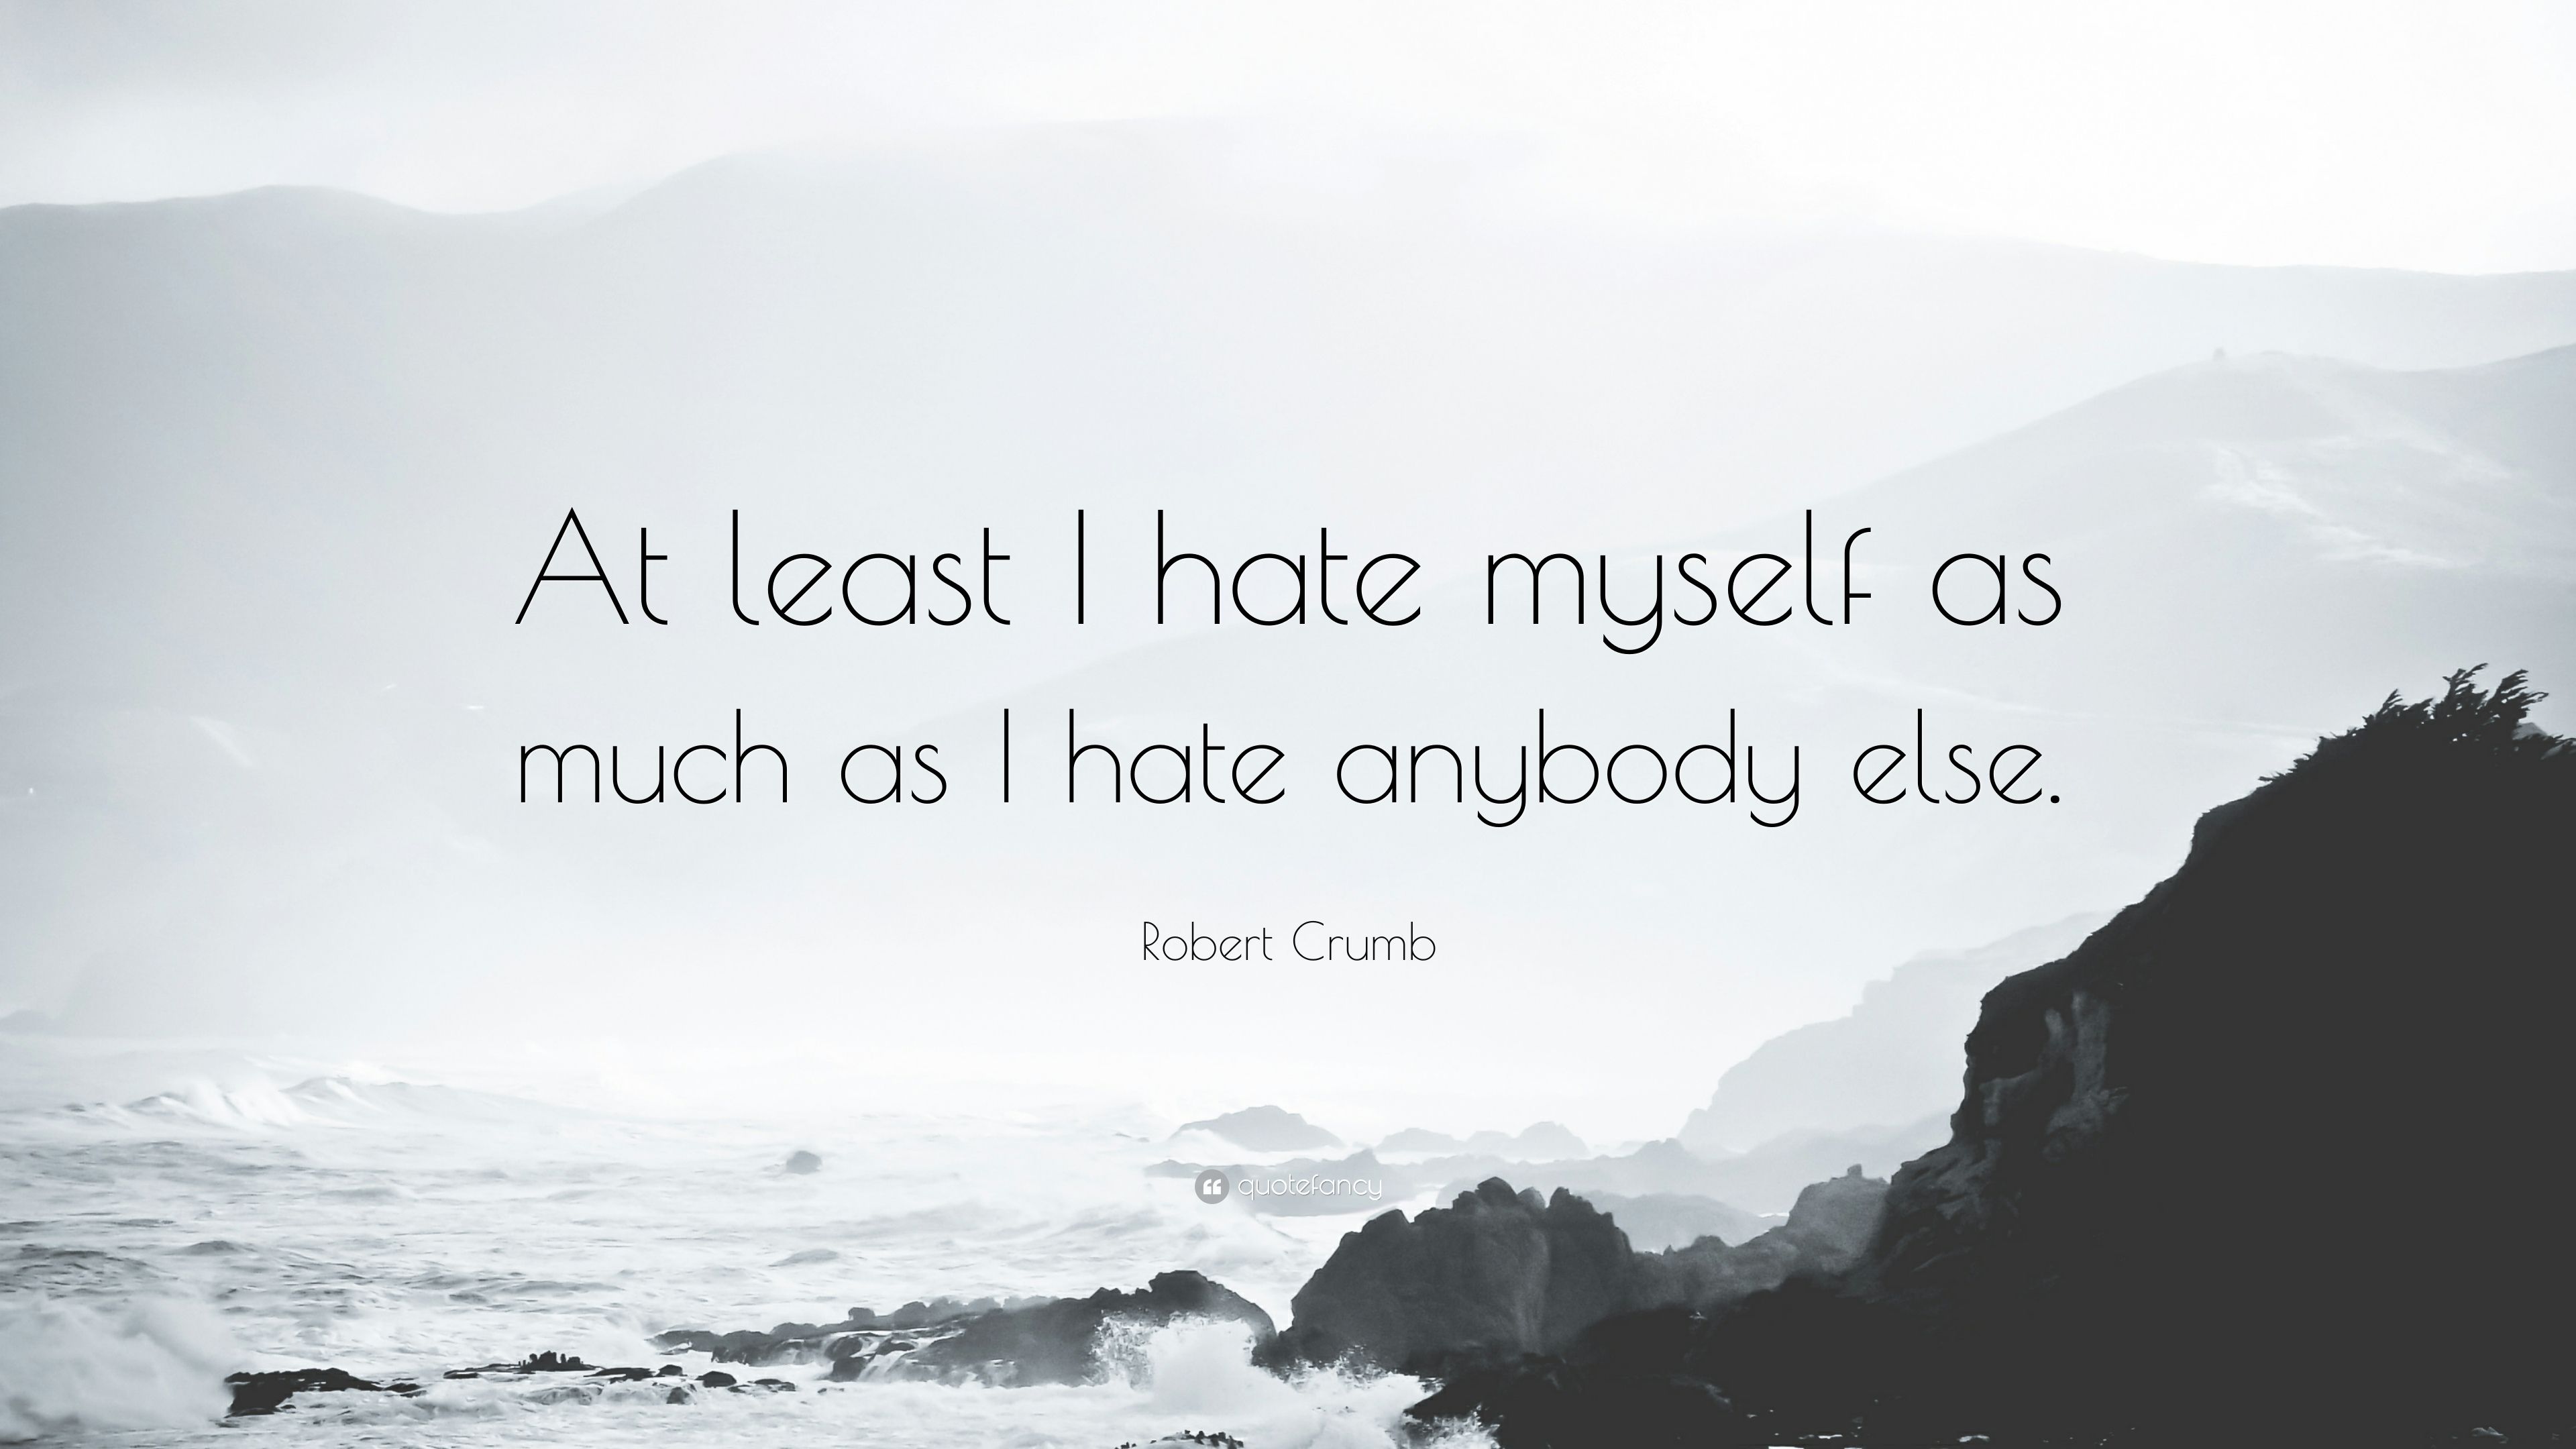 Robert Crumb Quote: “At least I hate myself as much as I hate